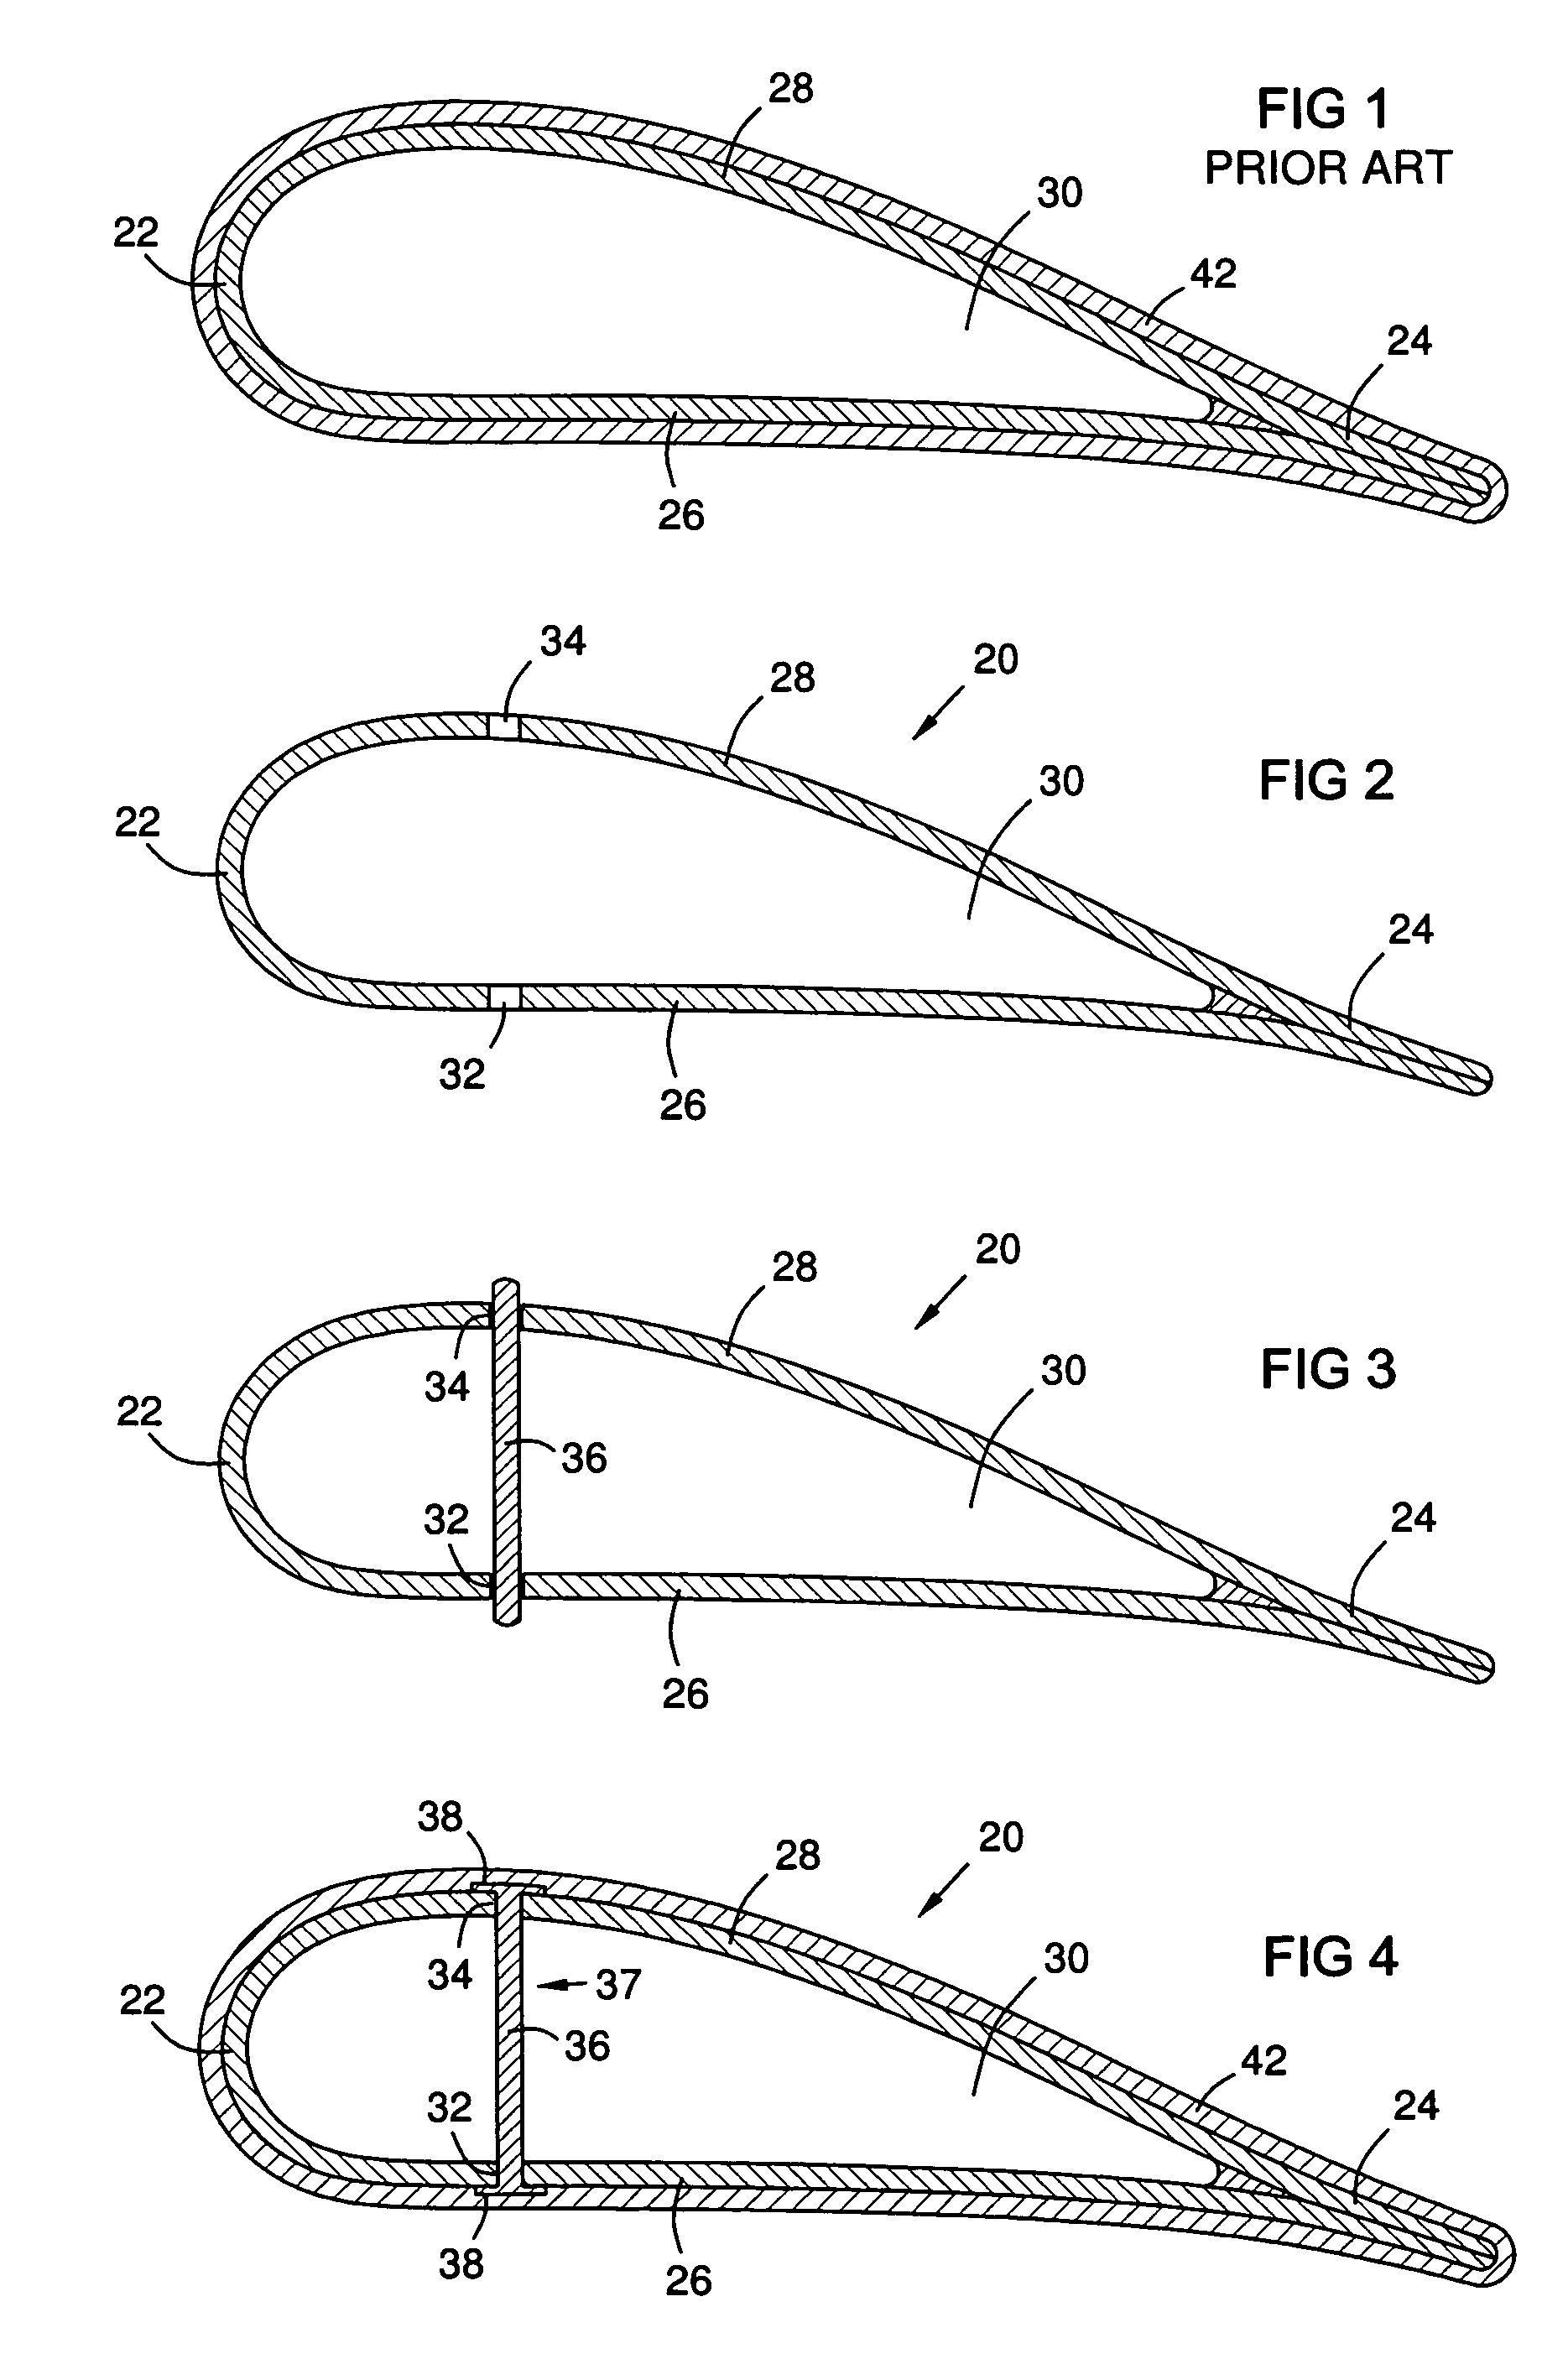 Hollow CMC airfoil with internal stitch